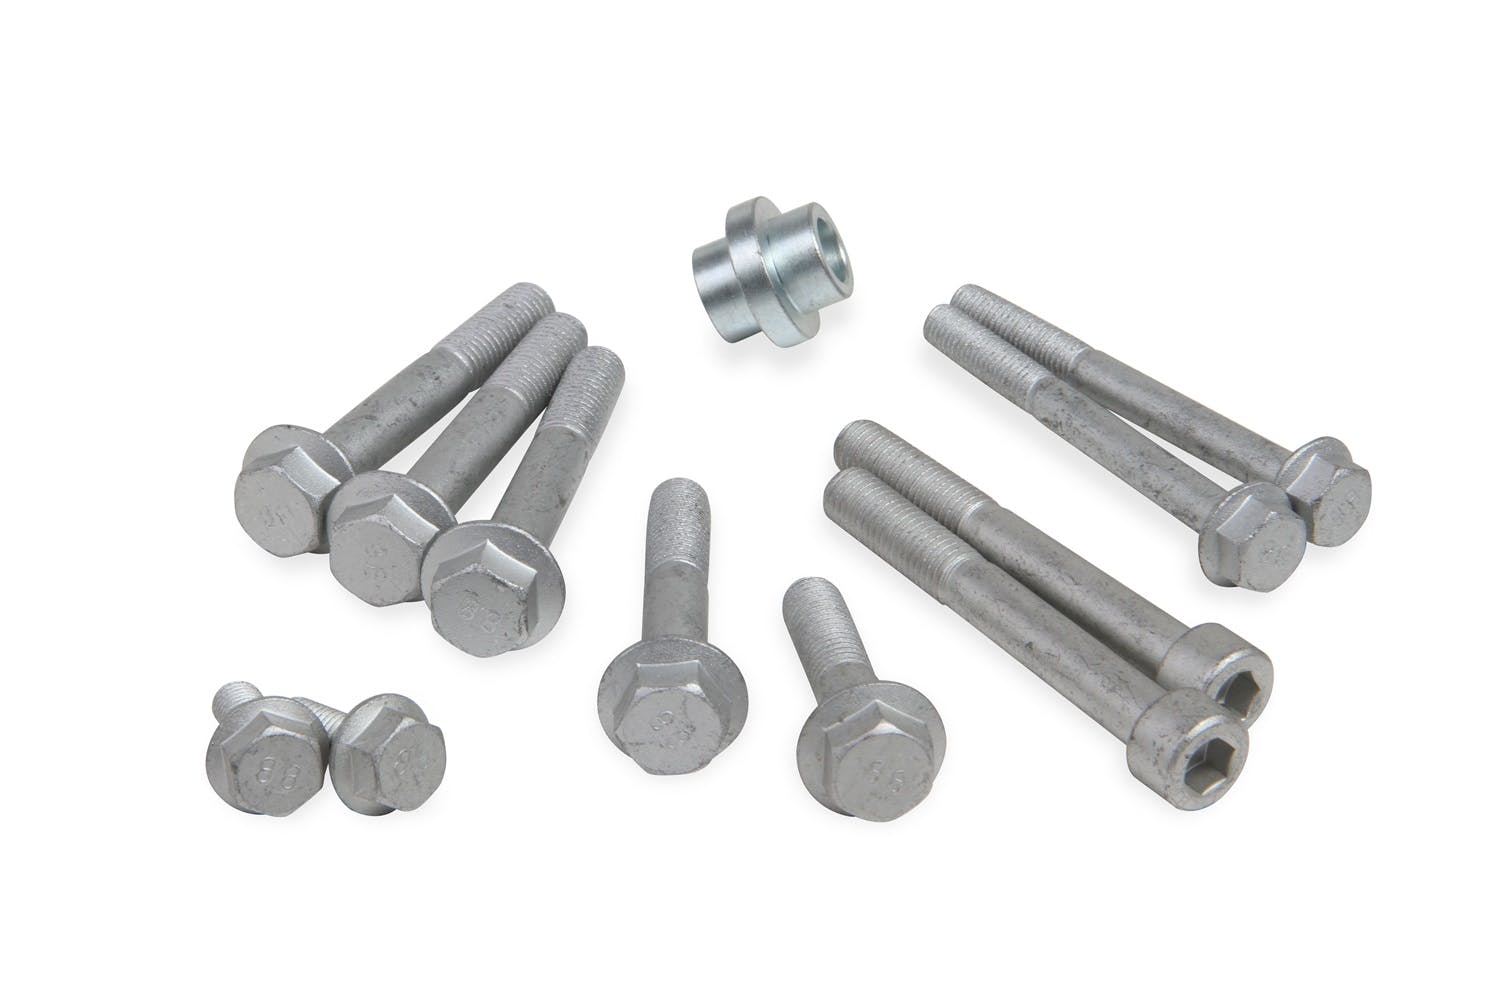 Holley 97-174 REPLACEMENT HARDWARE KIT FOR 20-135